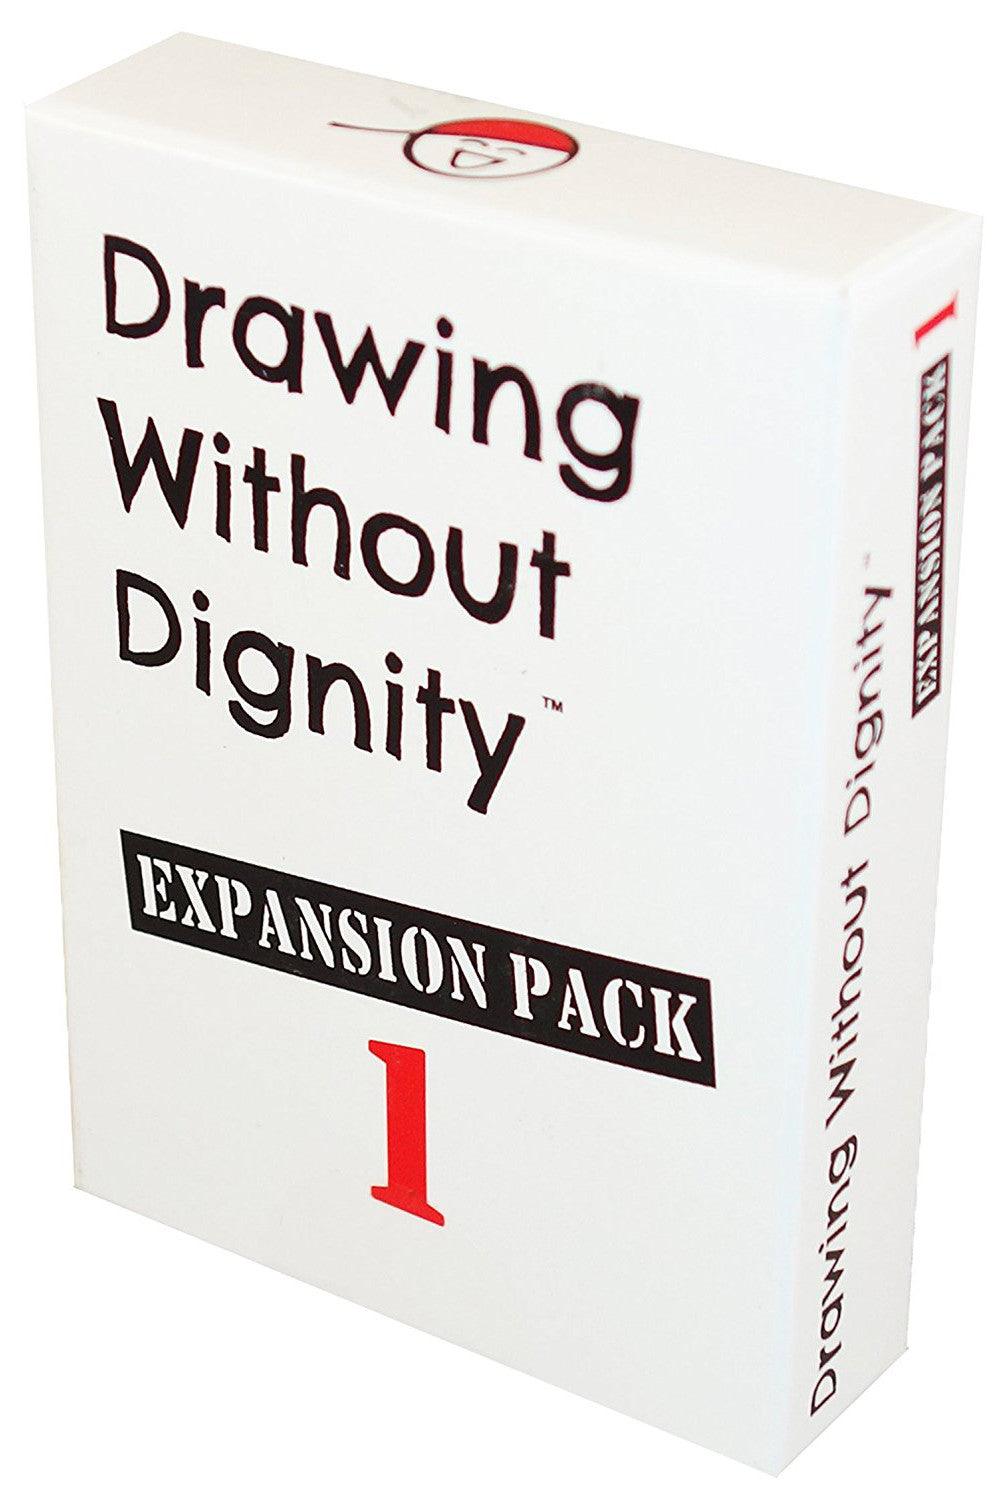 VR-50842 Drawing Without Dignity Expansion Pack 1 - TwoPointOh Games - Titan Pop Culture